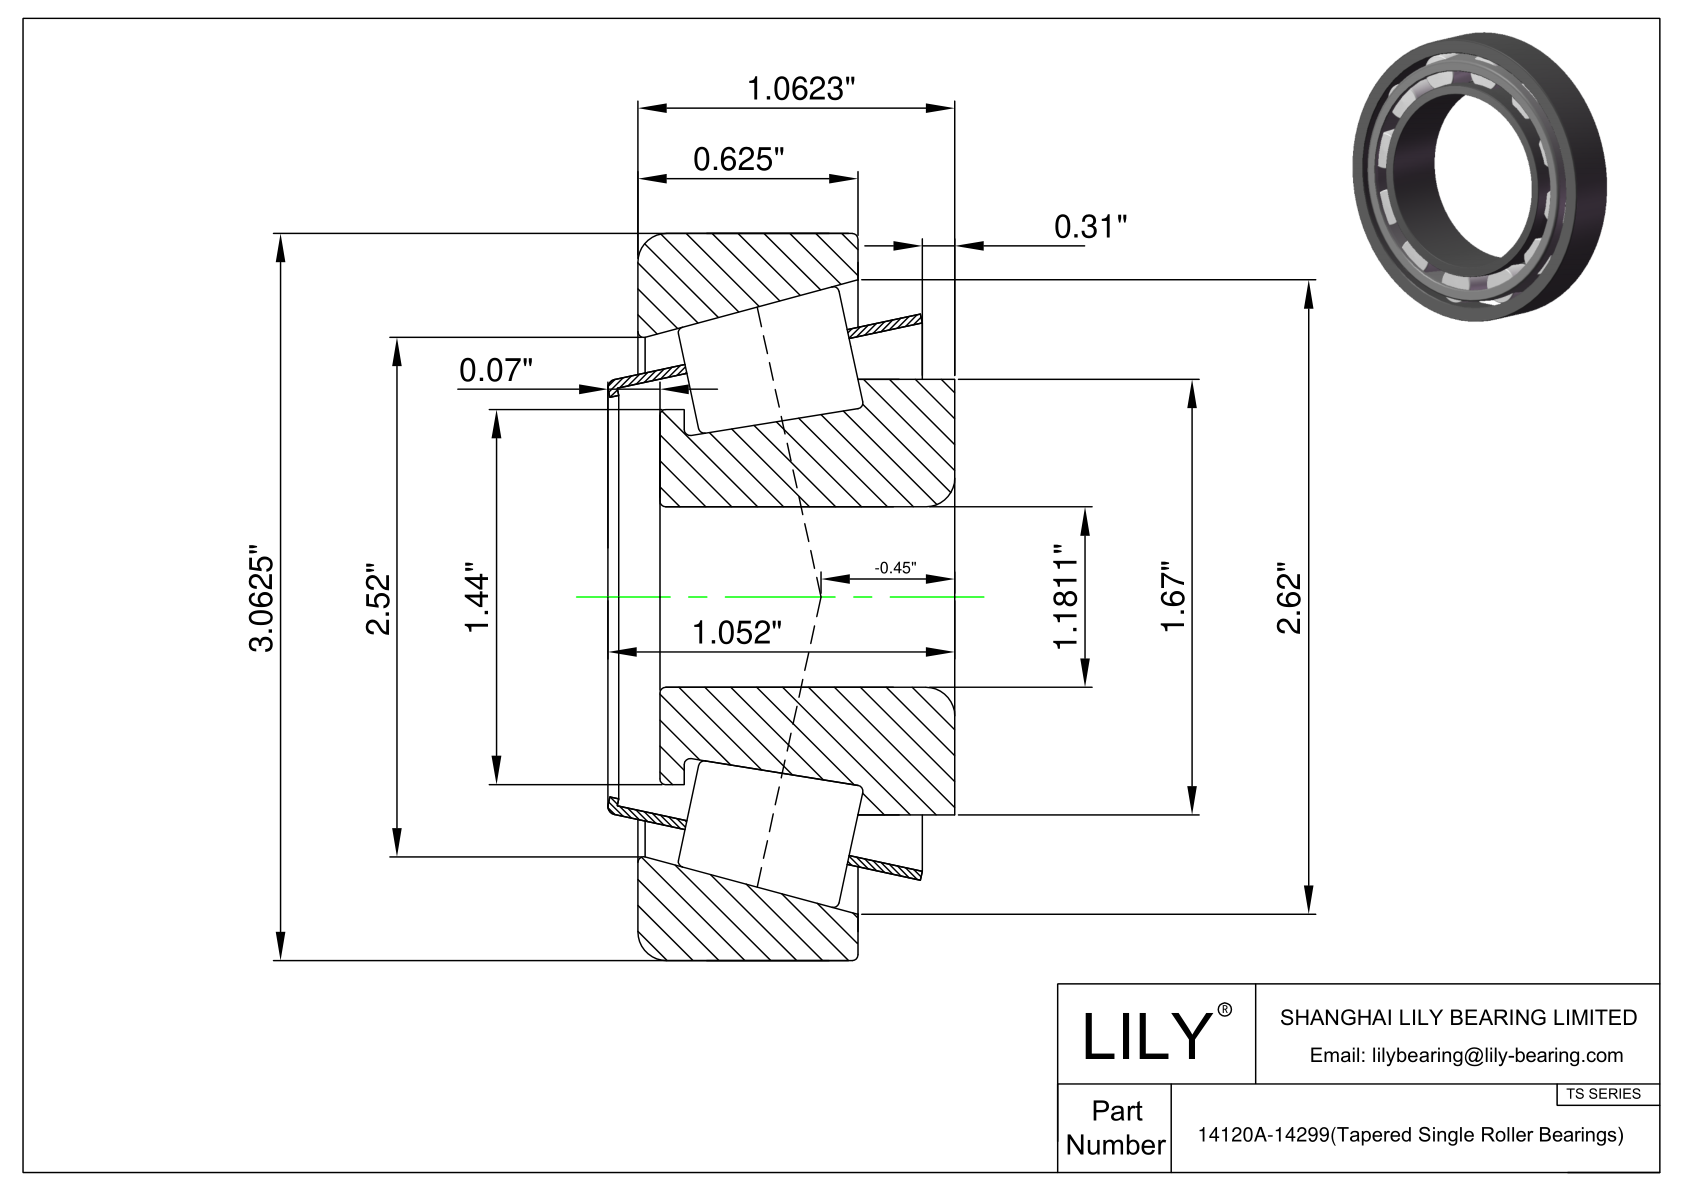 14120A-14299 TS (Tapered Single Roller Bearings) (Imperial) cad drawing